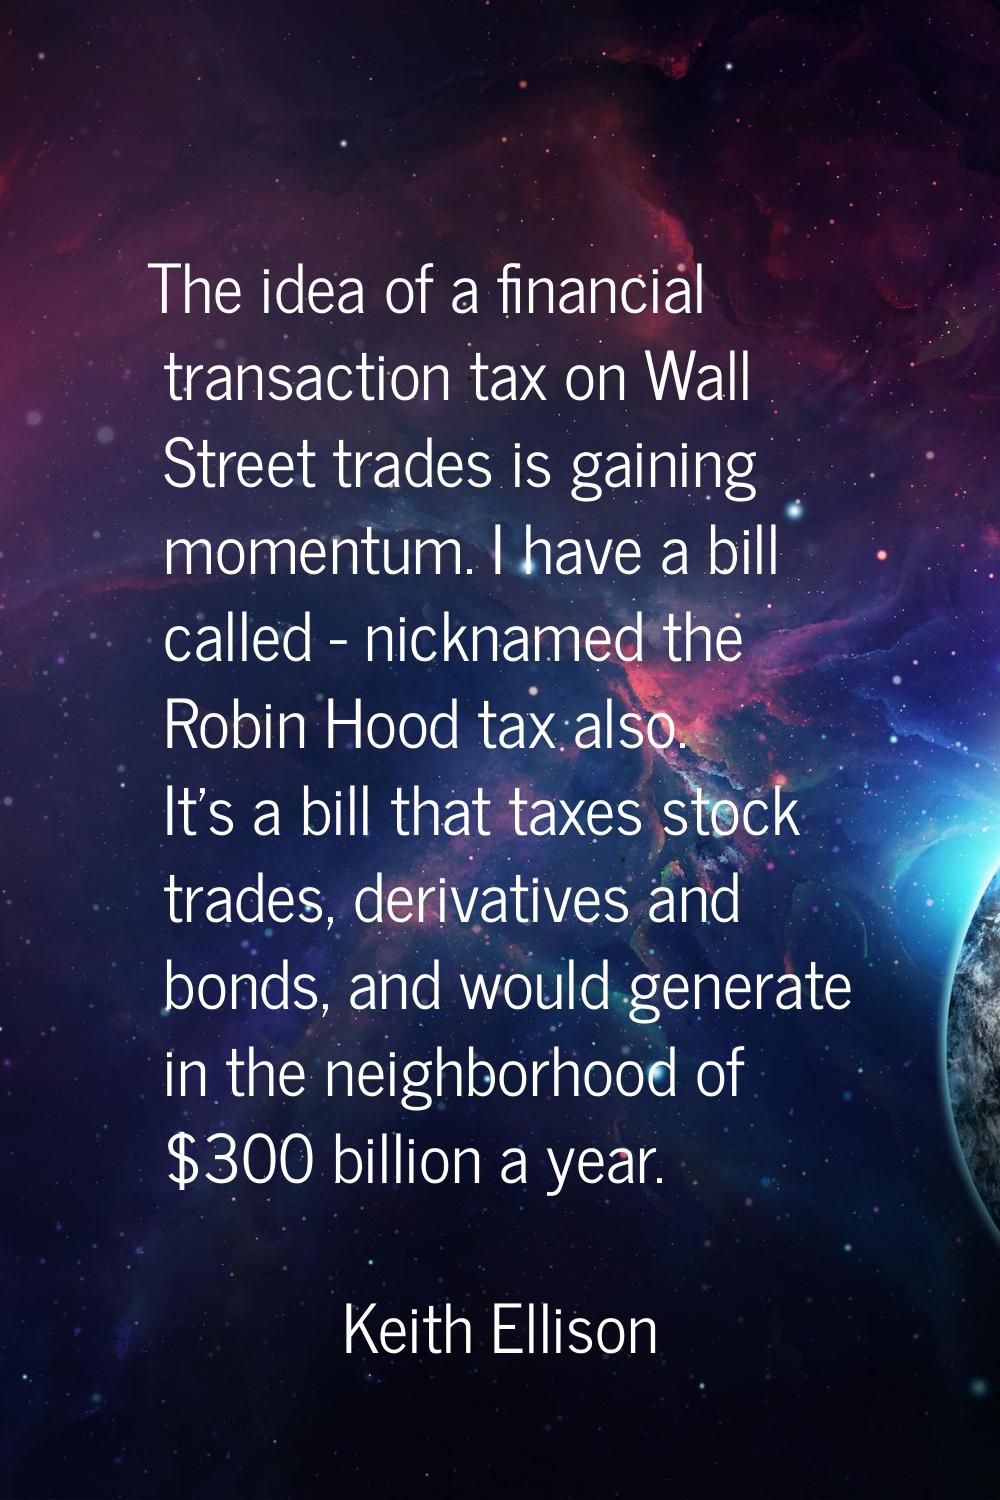 The idea of a financial transaction tax on Wall Street trades is gaining momentum. I have a bill ca